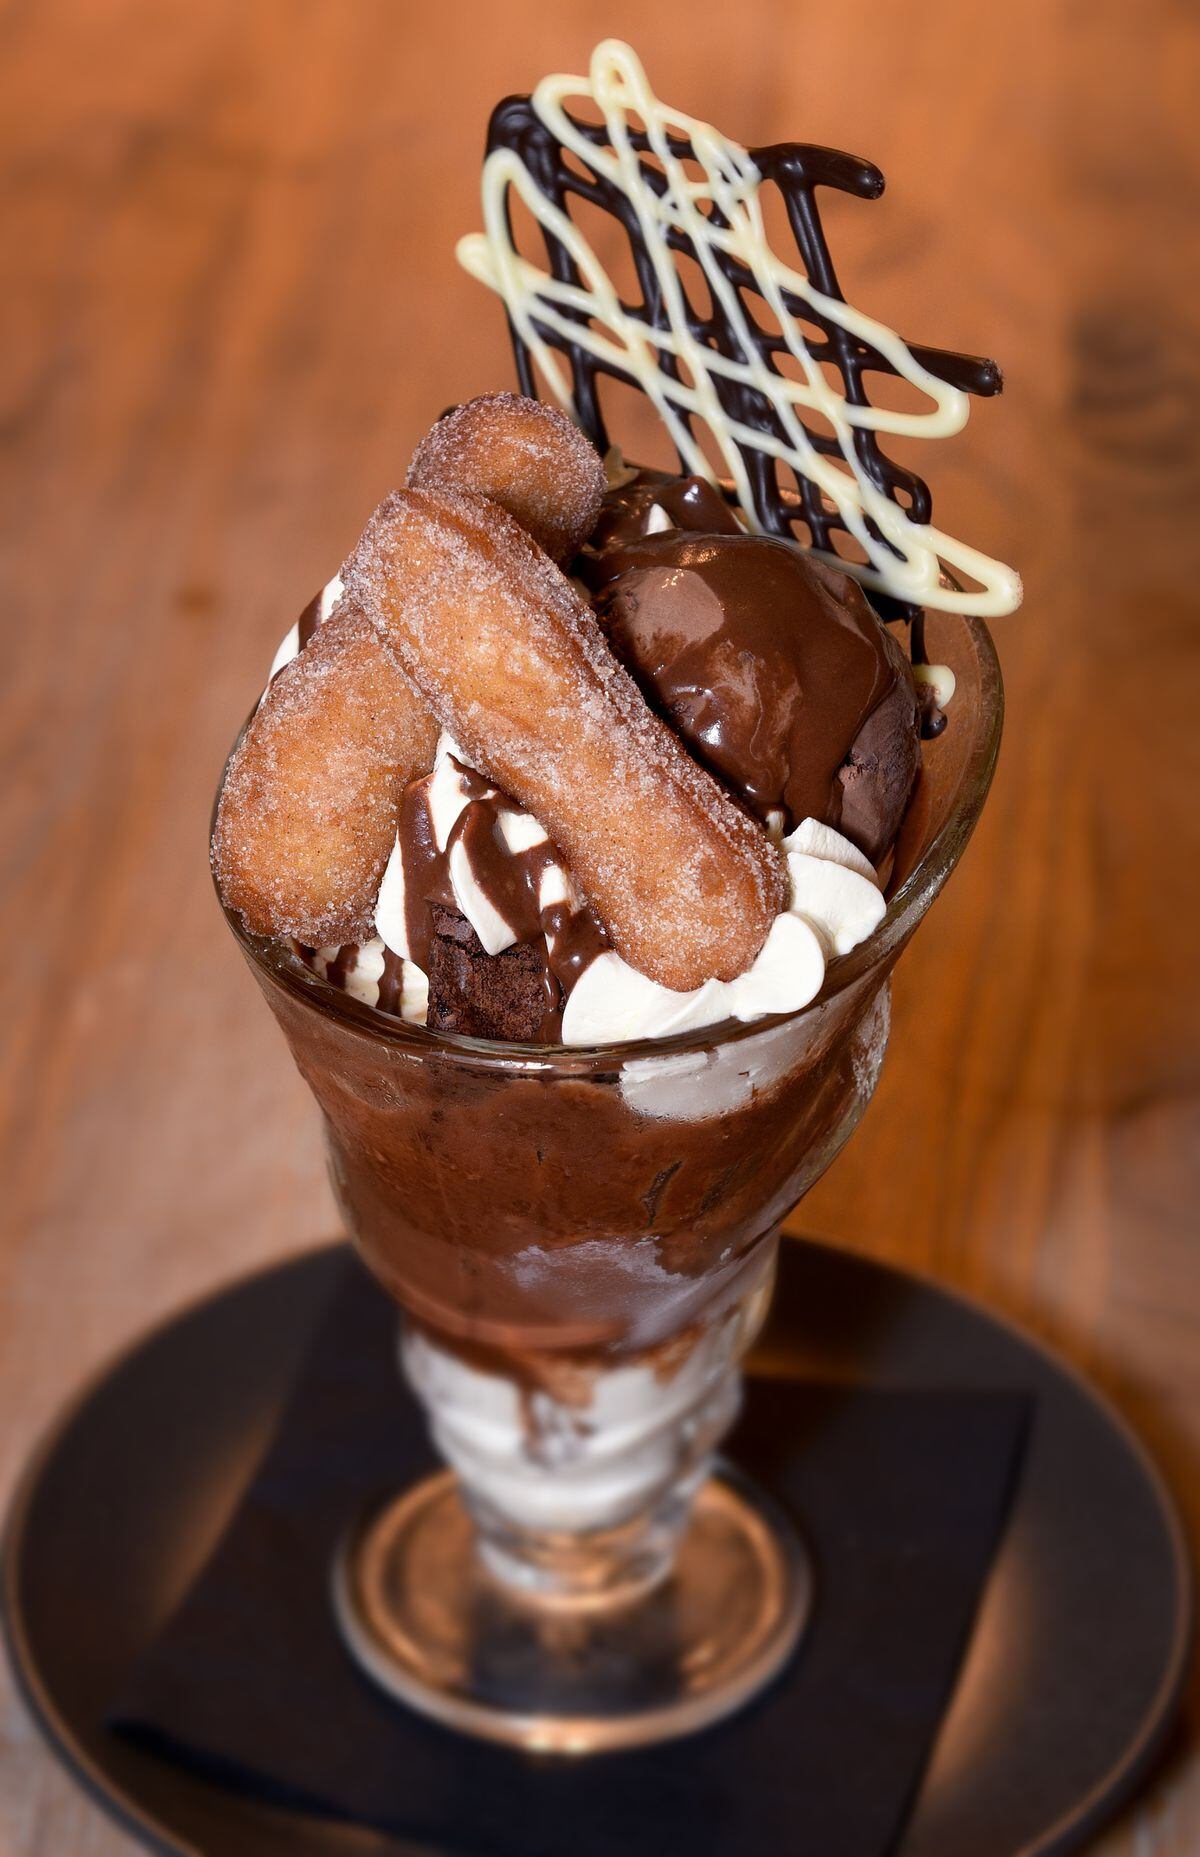 Frosted churros & chocolate brownie sundae